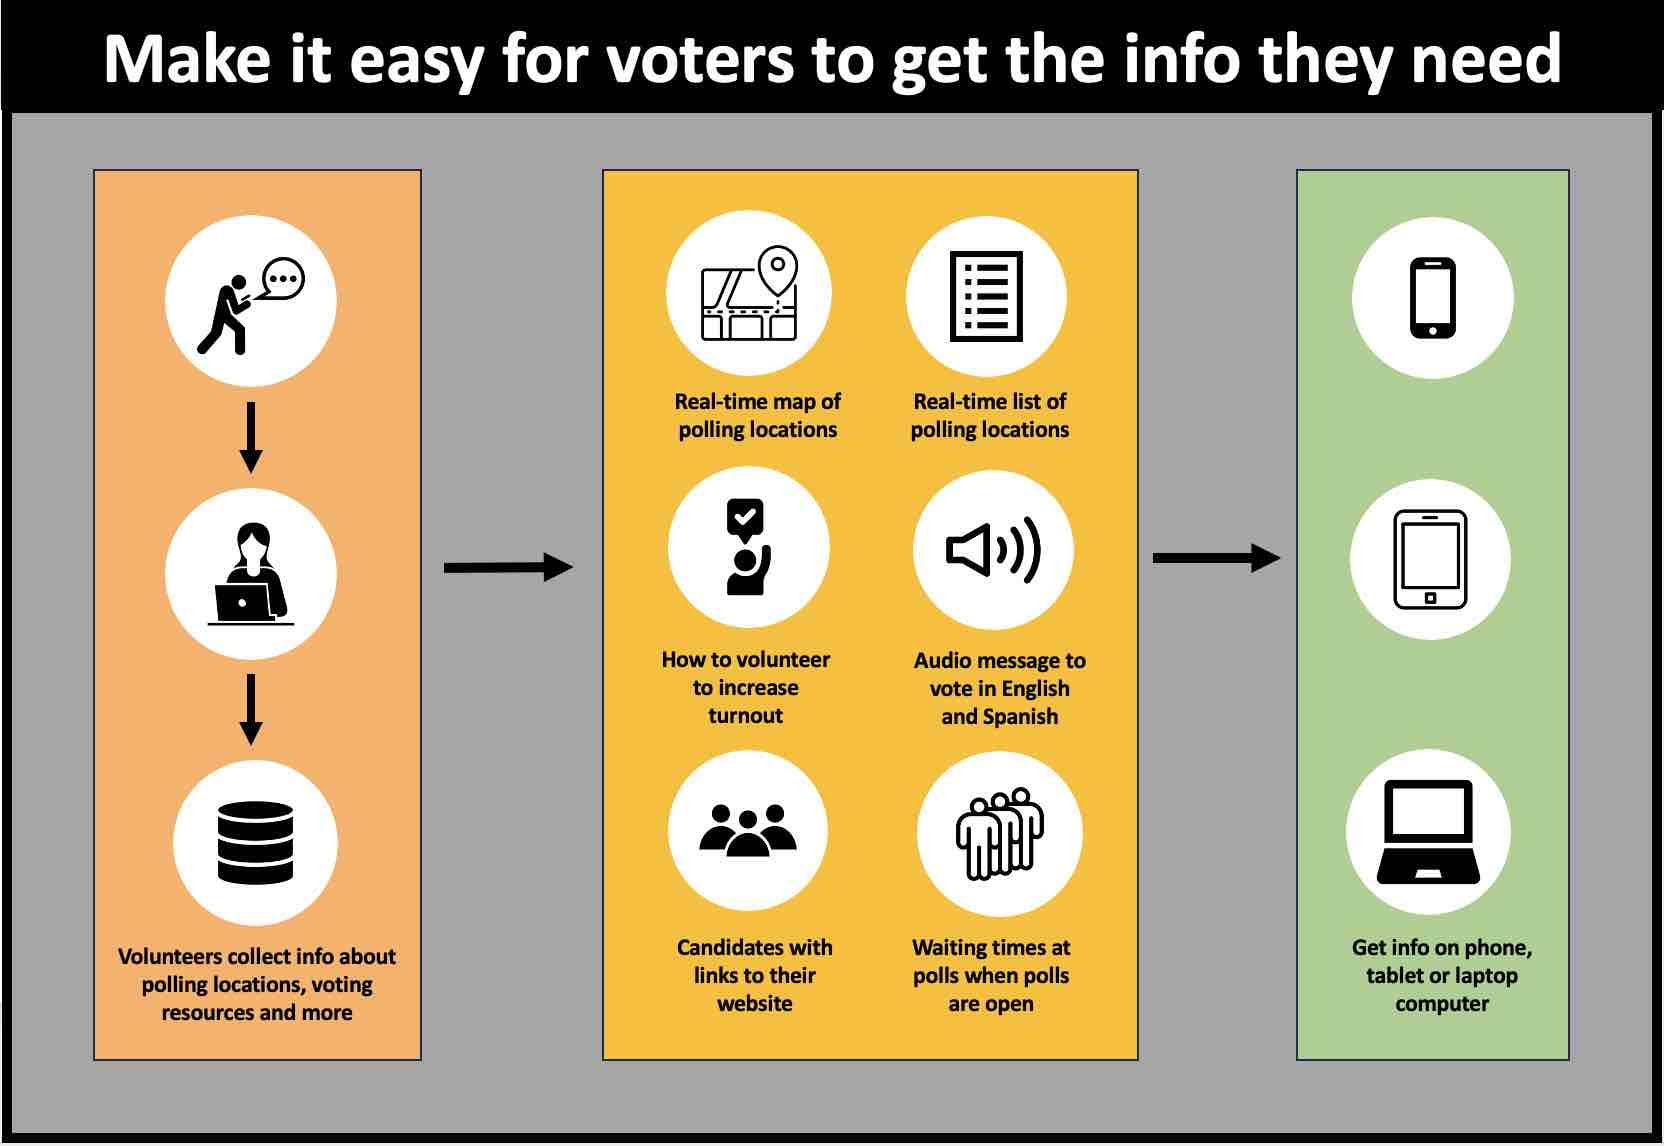 Make it easy for voters to get the information they need to vote and volunteer. Find out about candidates.